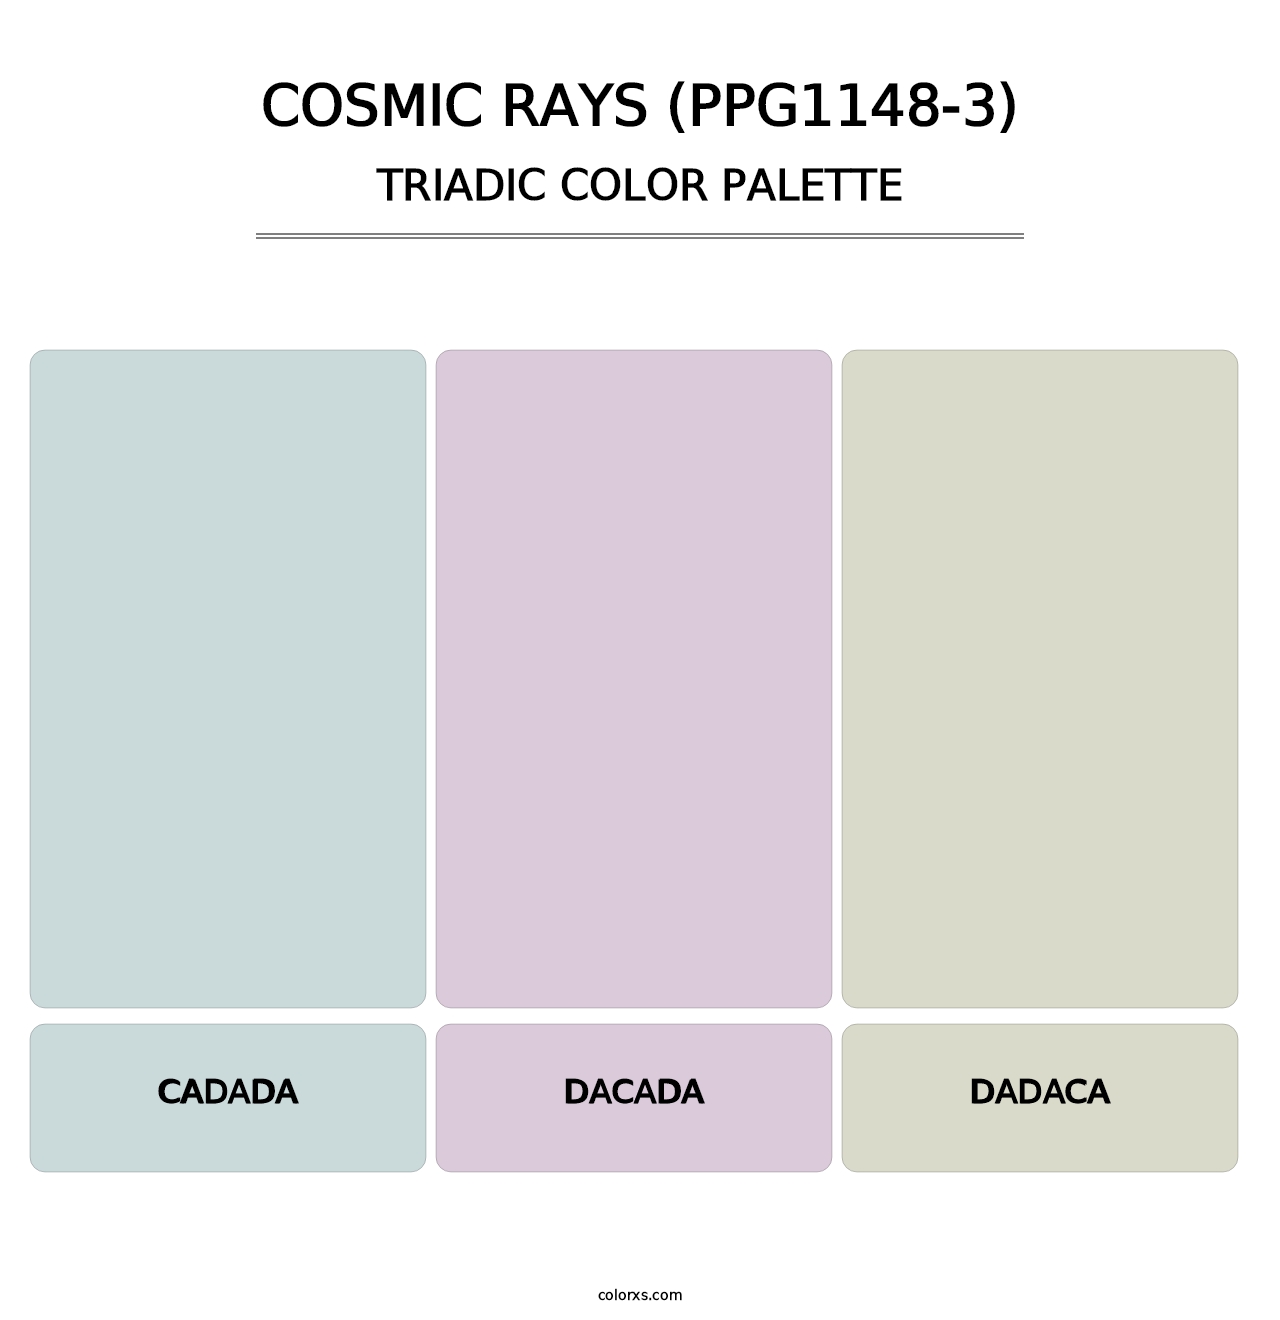 Cosmic Rays (PPG1148-3) - Triadic Color Palette